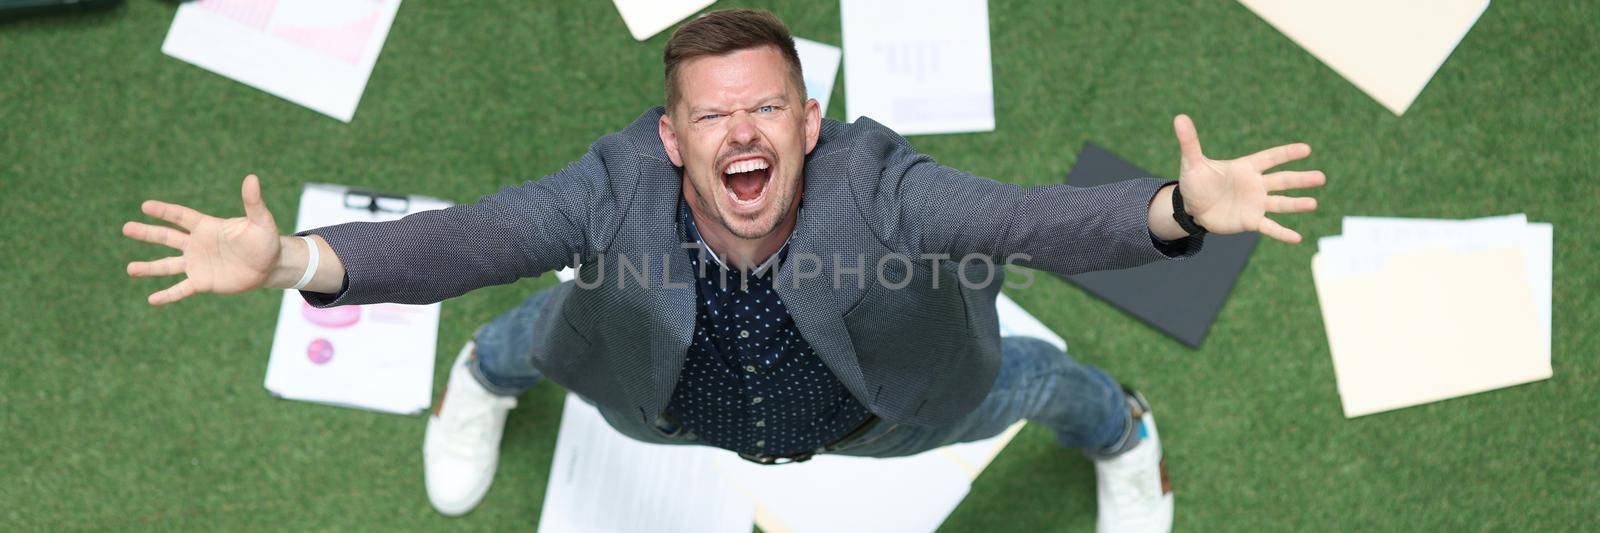 Man in suit throwing papers on green grass and yelling with his hands up top view by kuprevich